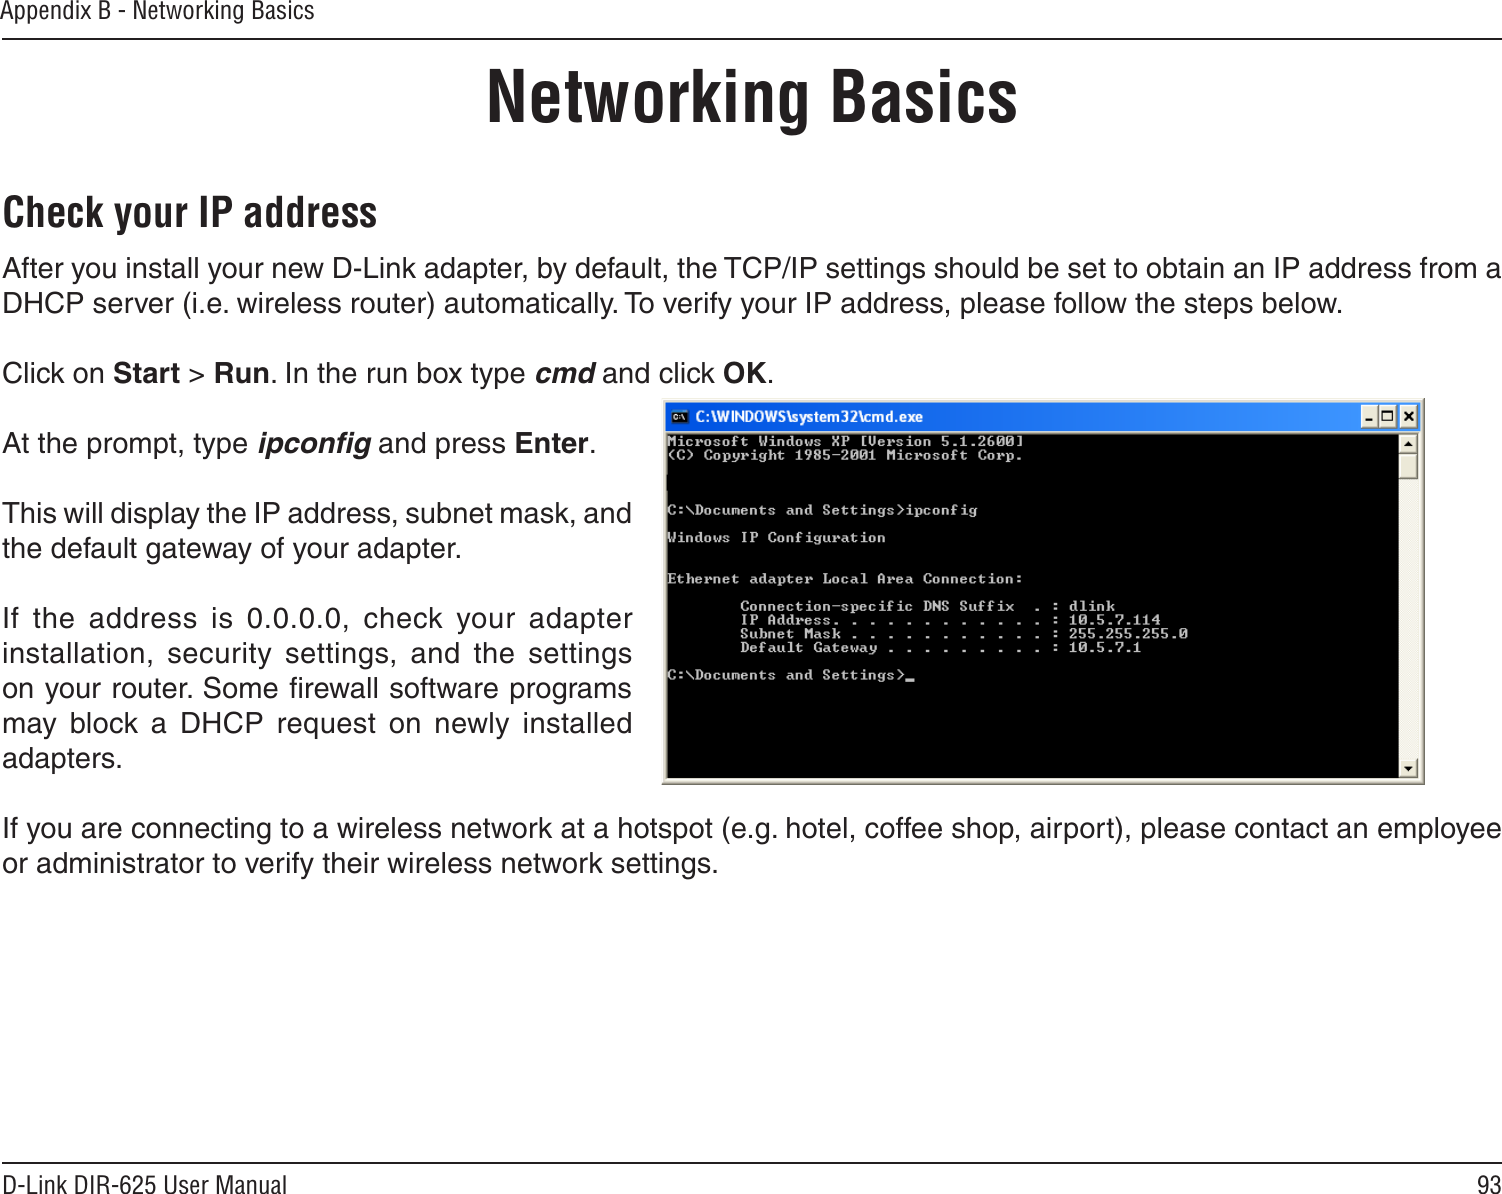 93D-Link DIR-625 User ManualAppendix B - Networking BasicsNetworking BasicsCheck your IP addressAfter you install your new D-Link adapter, by default, the TCP/IP settings should be set to obtain an IP address from a DHCP server (i.e. wireless router) automatically. To verify your IP address, please follow the steps below.Click on Start &gt; Run. In the run box type cmd and click OK.At the prompt, type ipconﬁg and press Enter.This will display the IP address, subnet mask, and the default gateway of your adapter.If  the  address  is  0.0.0.0,  check  your  adapter installation,  security  settings,  and  the  settings on your router. Some ﬁrewall software programs may  block  a  DHCP  request  on  newly  installed adapters. If you are connecting to a wireless network at a hotspot (e.g. hotel, coffee shop, airport), please contact an employee or administrator to verify their wireless network settings.